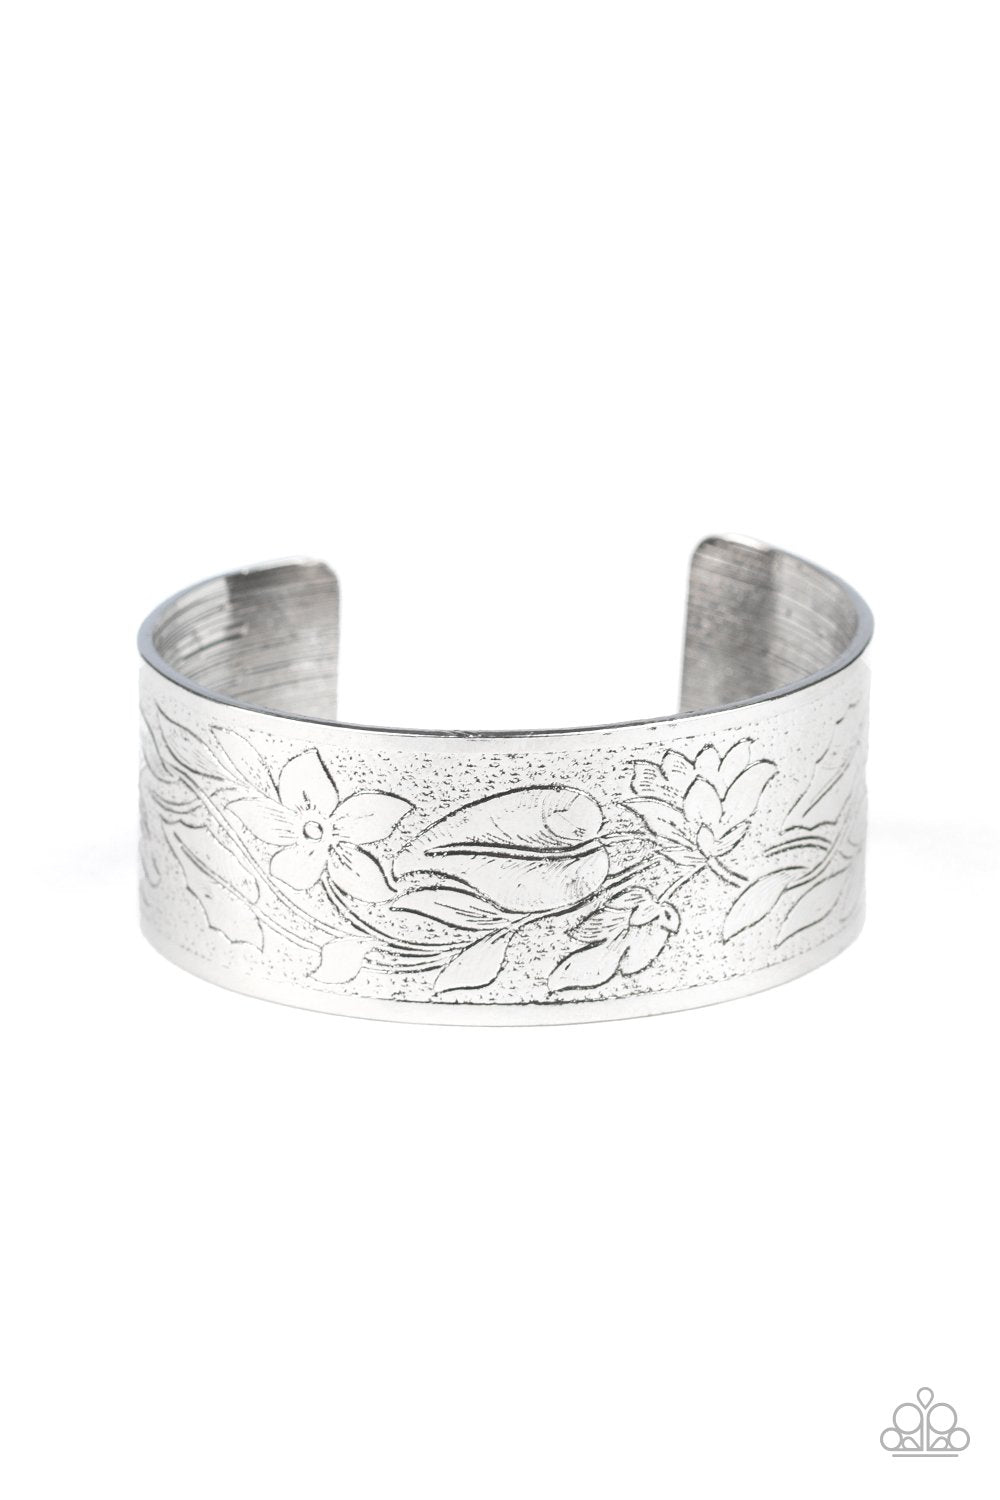 Garden Variety Silver Floral Cuff Bracelet- Paparazzi Accessories-CarasShop.com - $5 Jewelry by Cara Jewels